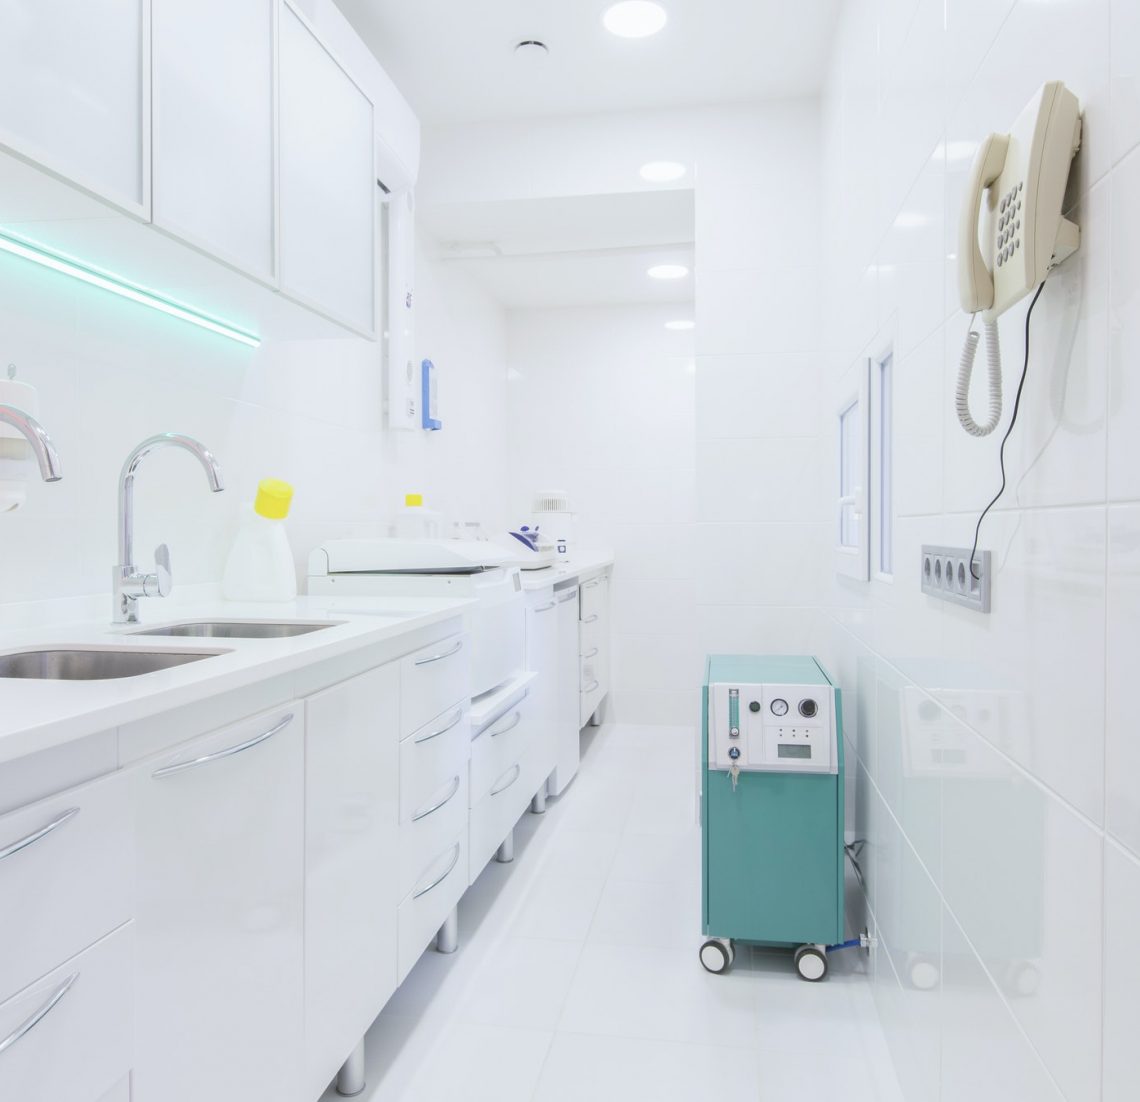 Hygiene room with modern equipment in professional medical hospital